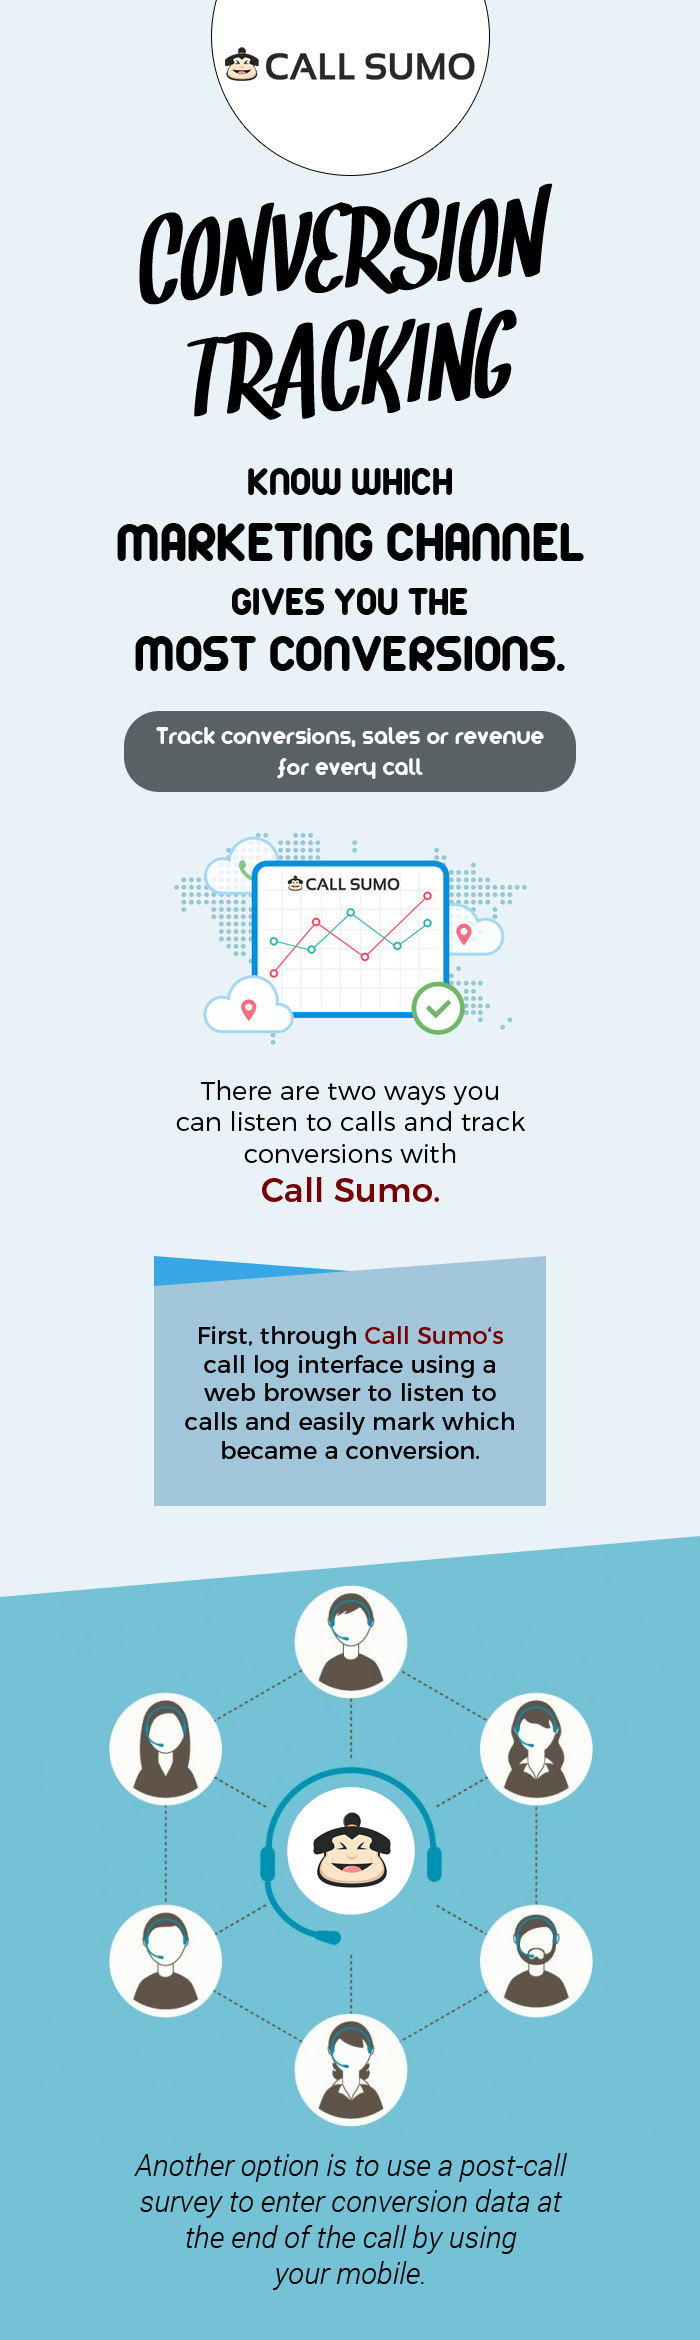 Use Call Sumo to Track Conversions, Sales & Revenue for Every Call